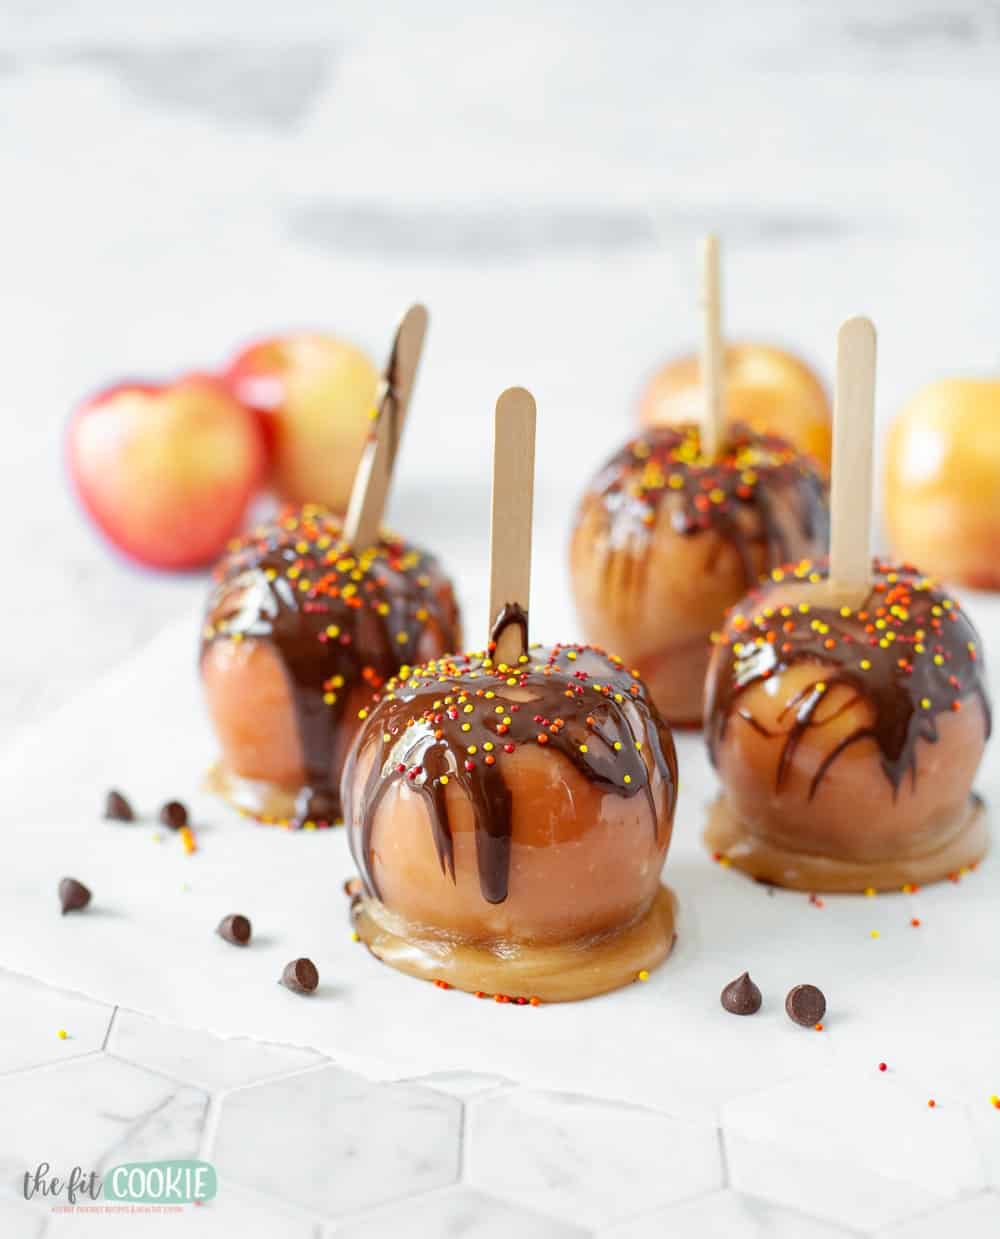 Caramel apples with chocolate and sprinkles.